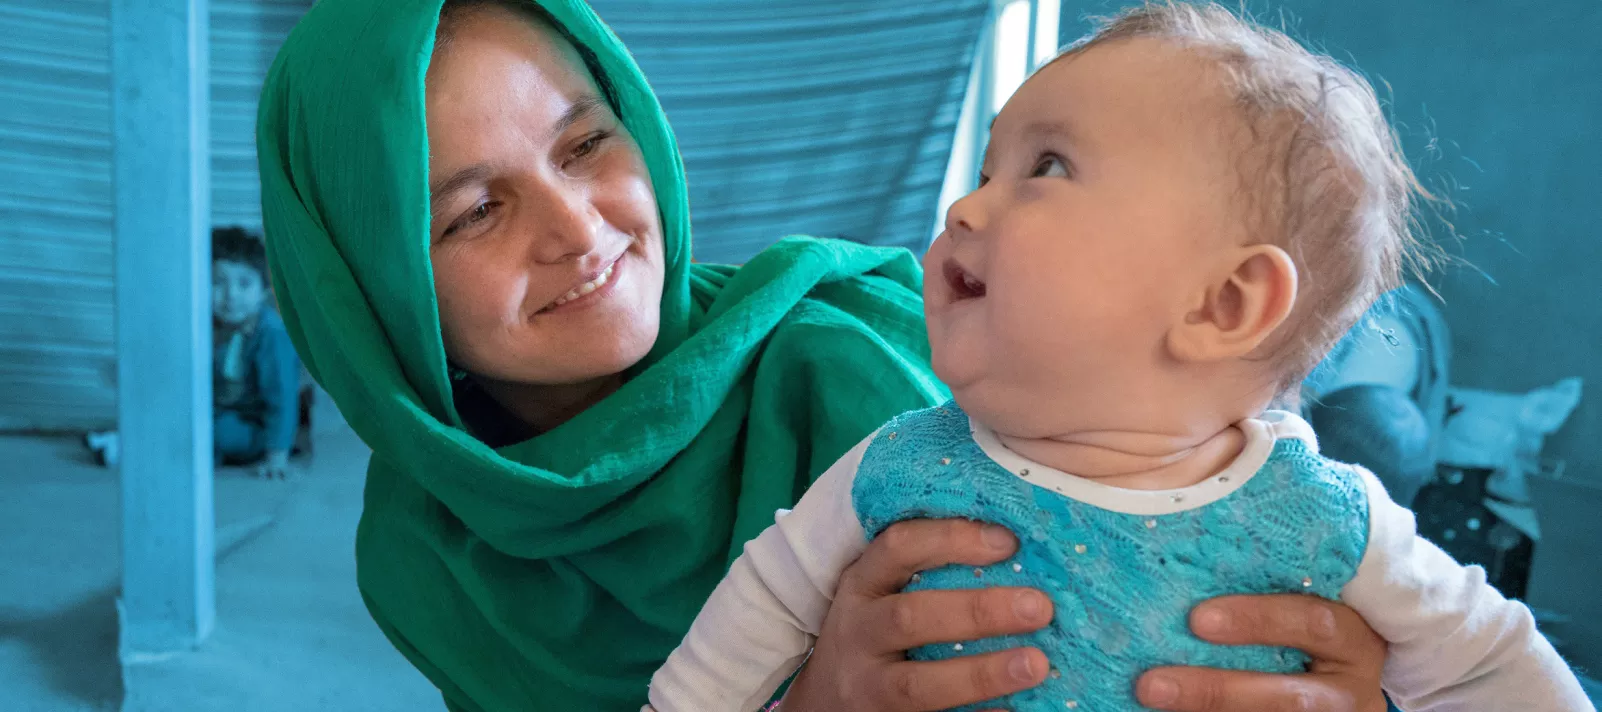 On 3rd October 2022, a mother and child attend the UNICEF-supported mobile health and nutrition clinic in Safeedi-Mish village in Nili District in Daikundi Province, central Afghanistan.  